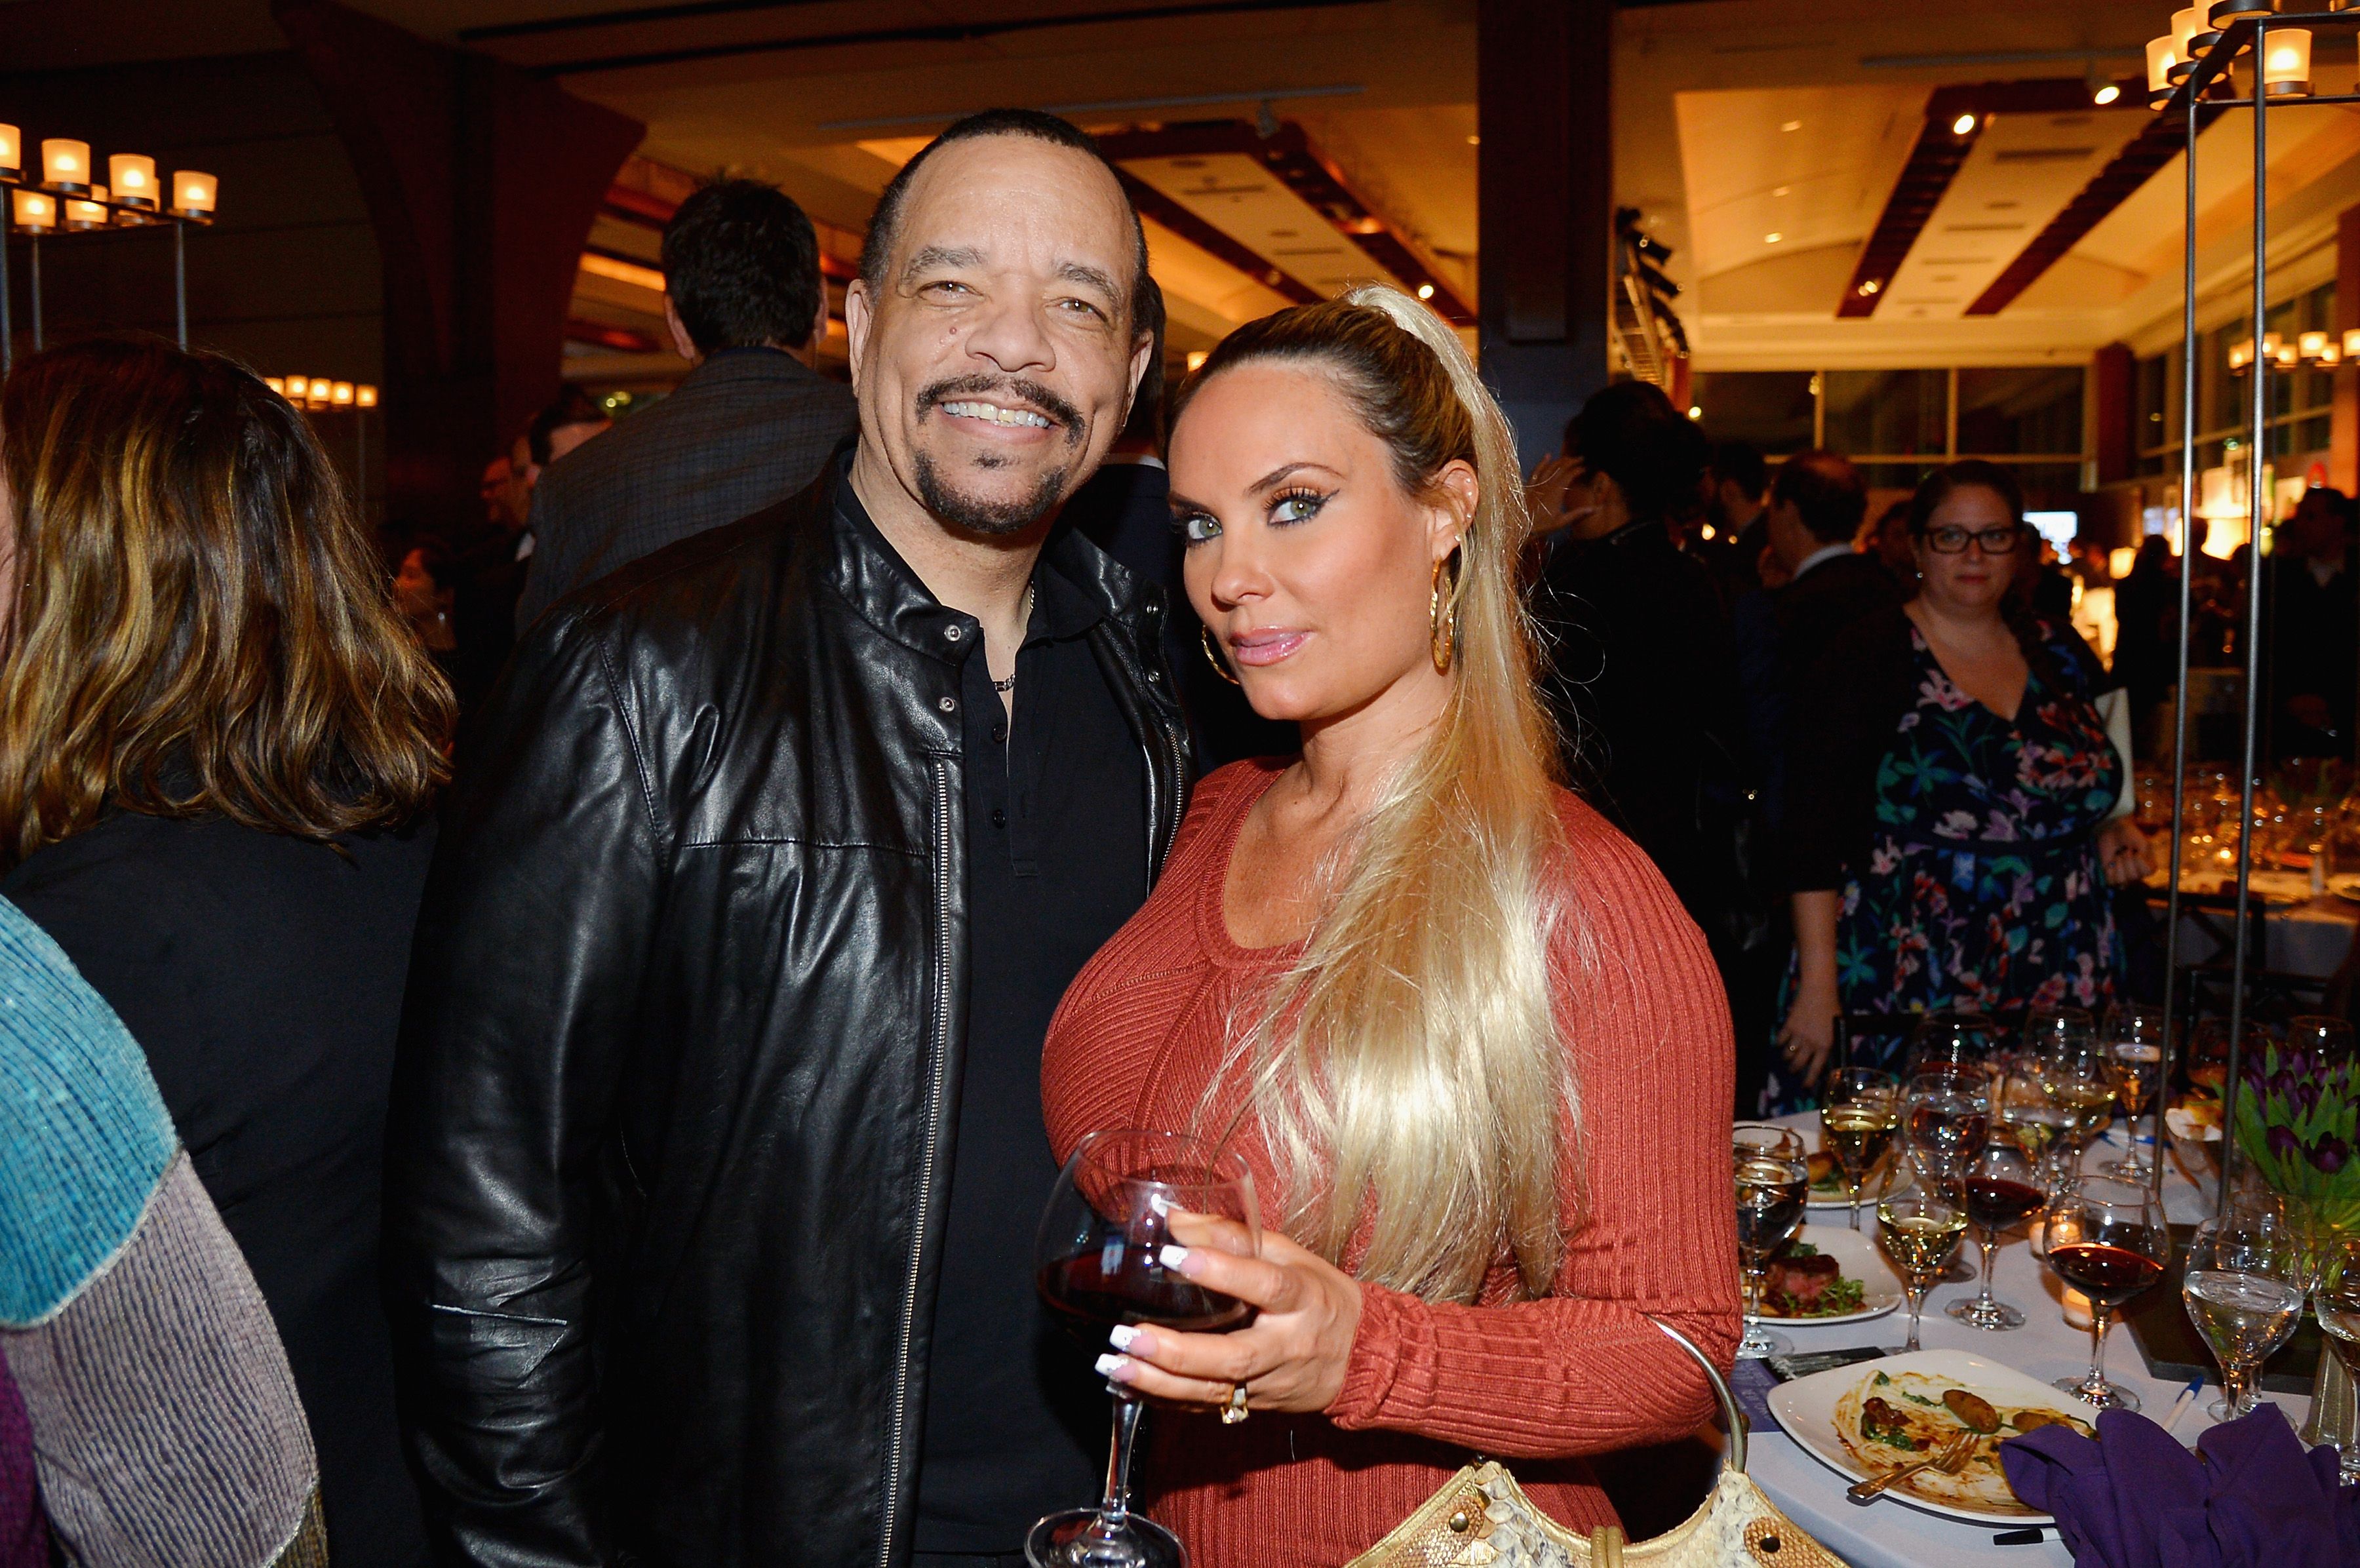 Ice-T and Coco Austin at the Bailey House Gala & Auction in New York City in 2017. | Photo: Getty Images